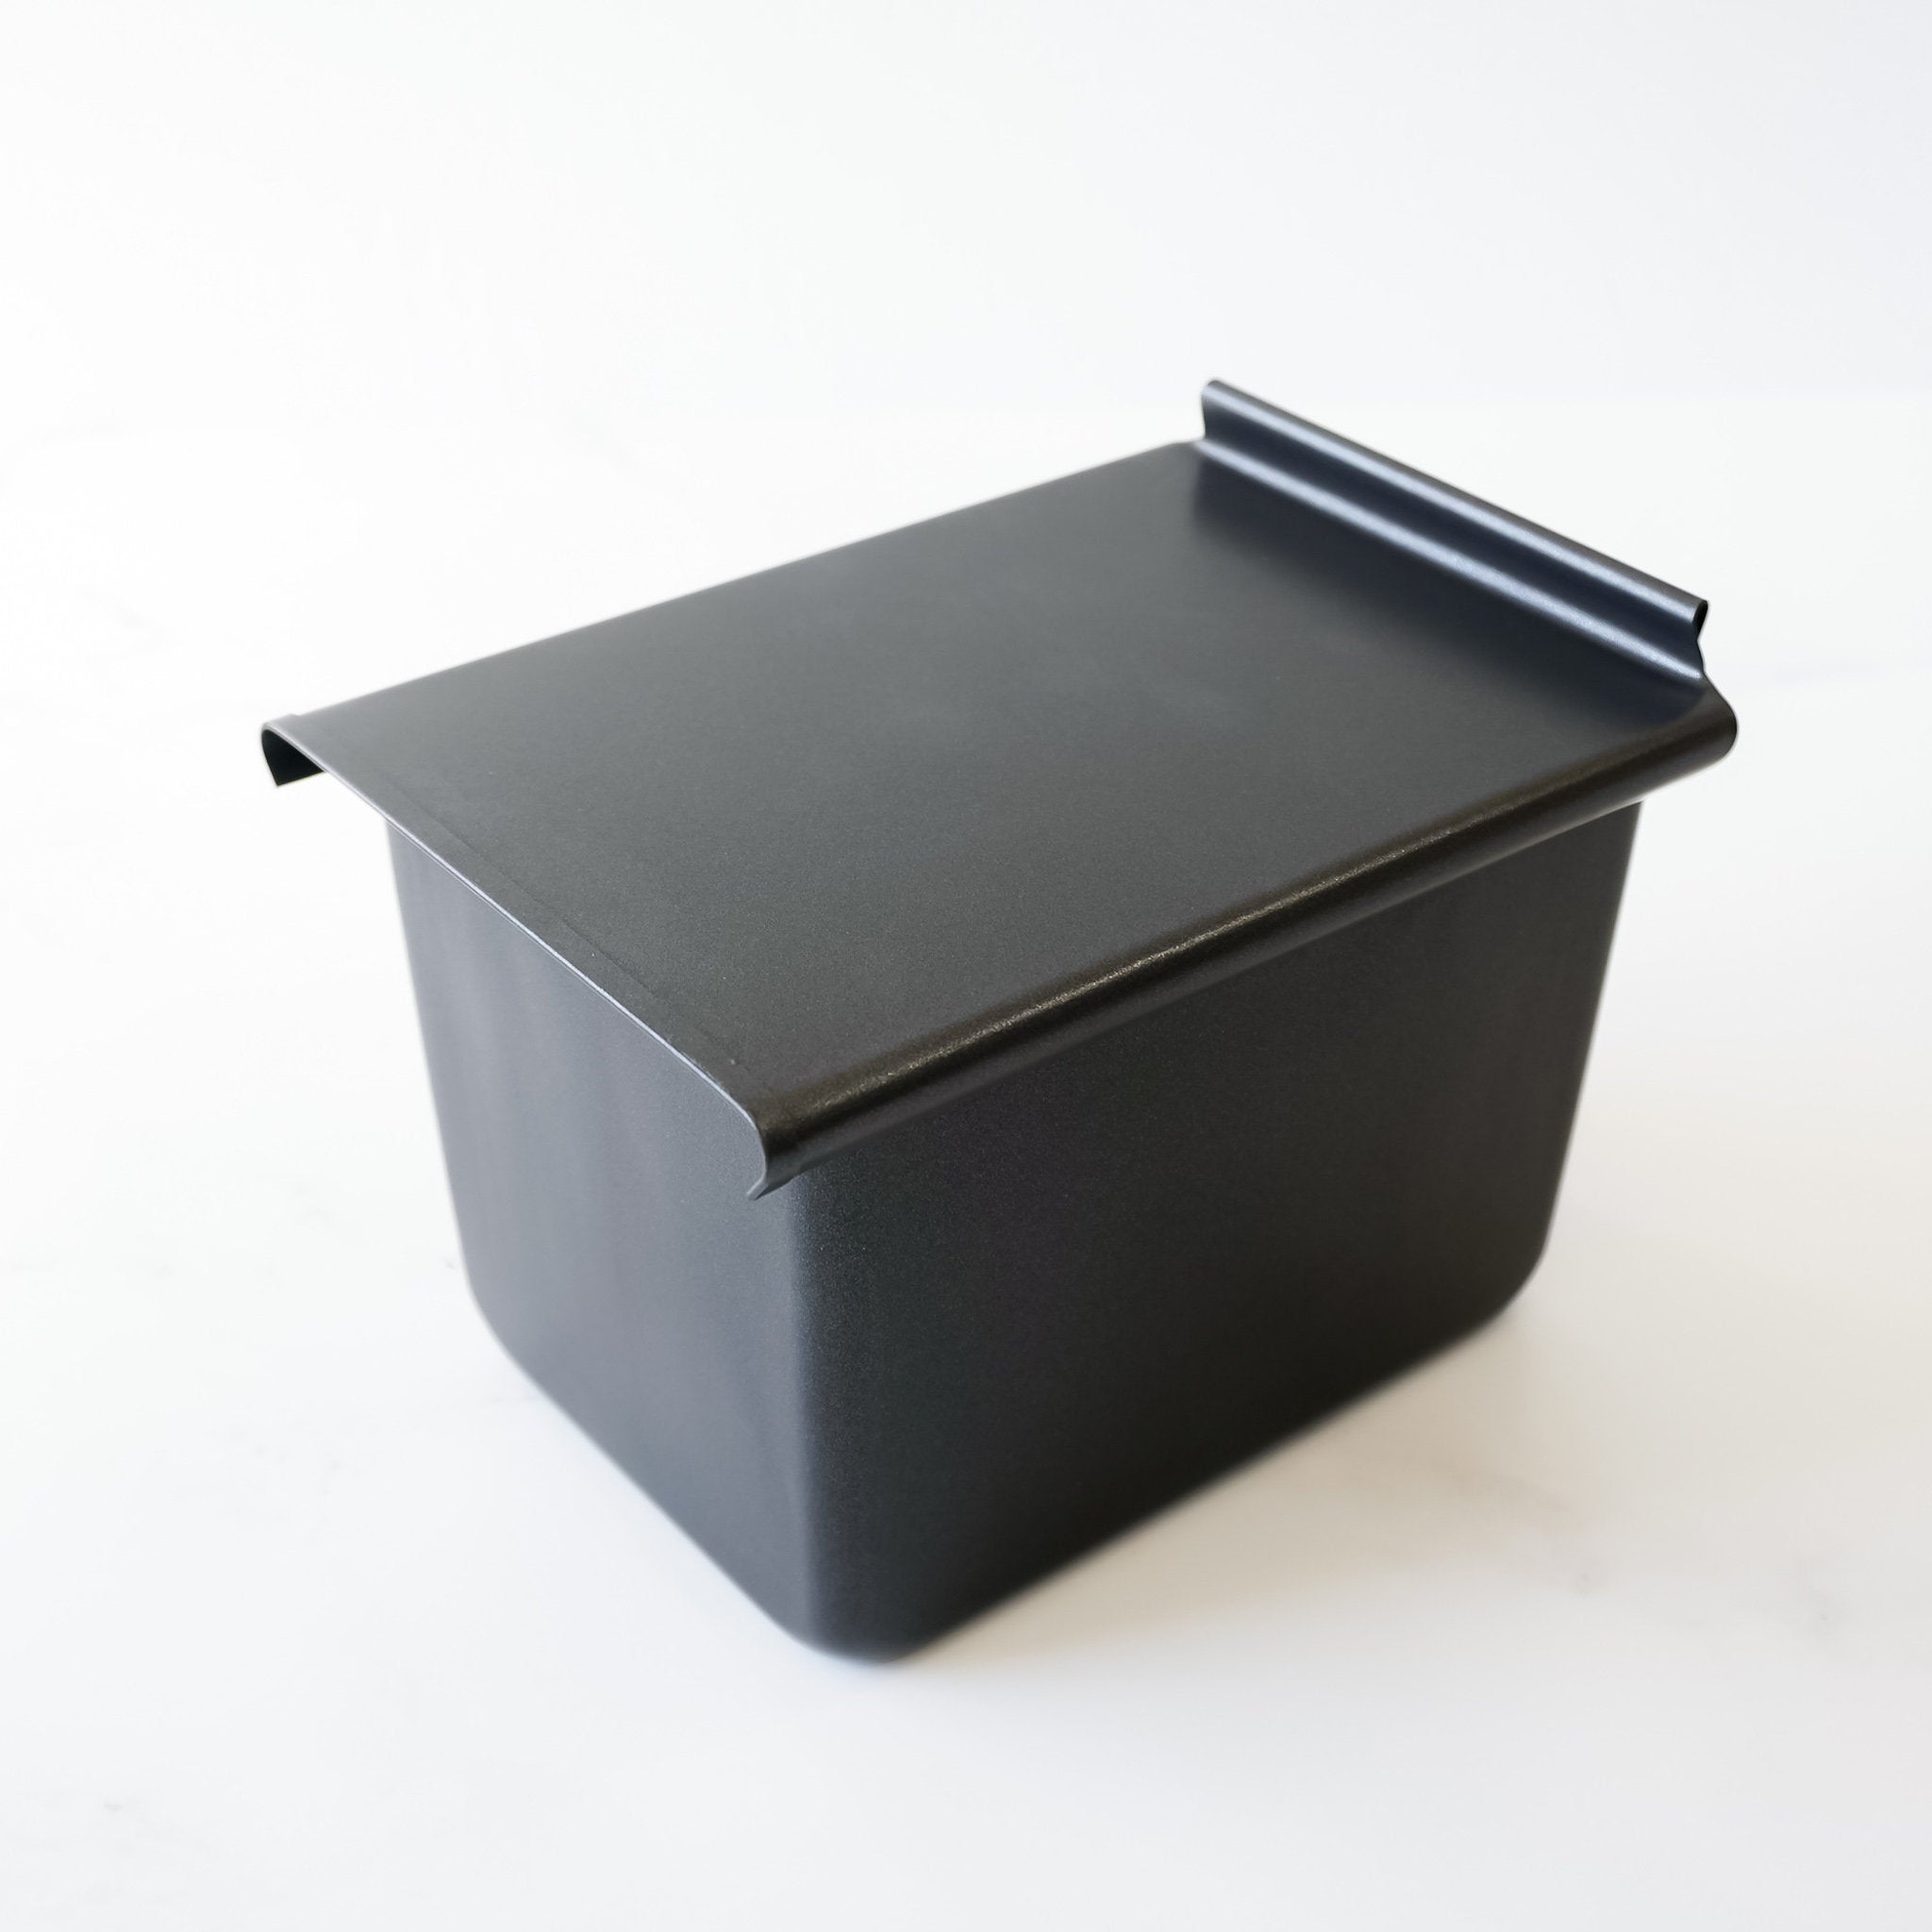 1/2 bread loaf pan with lid